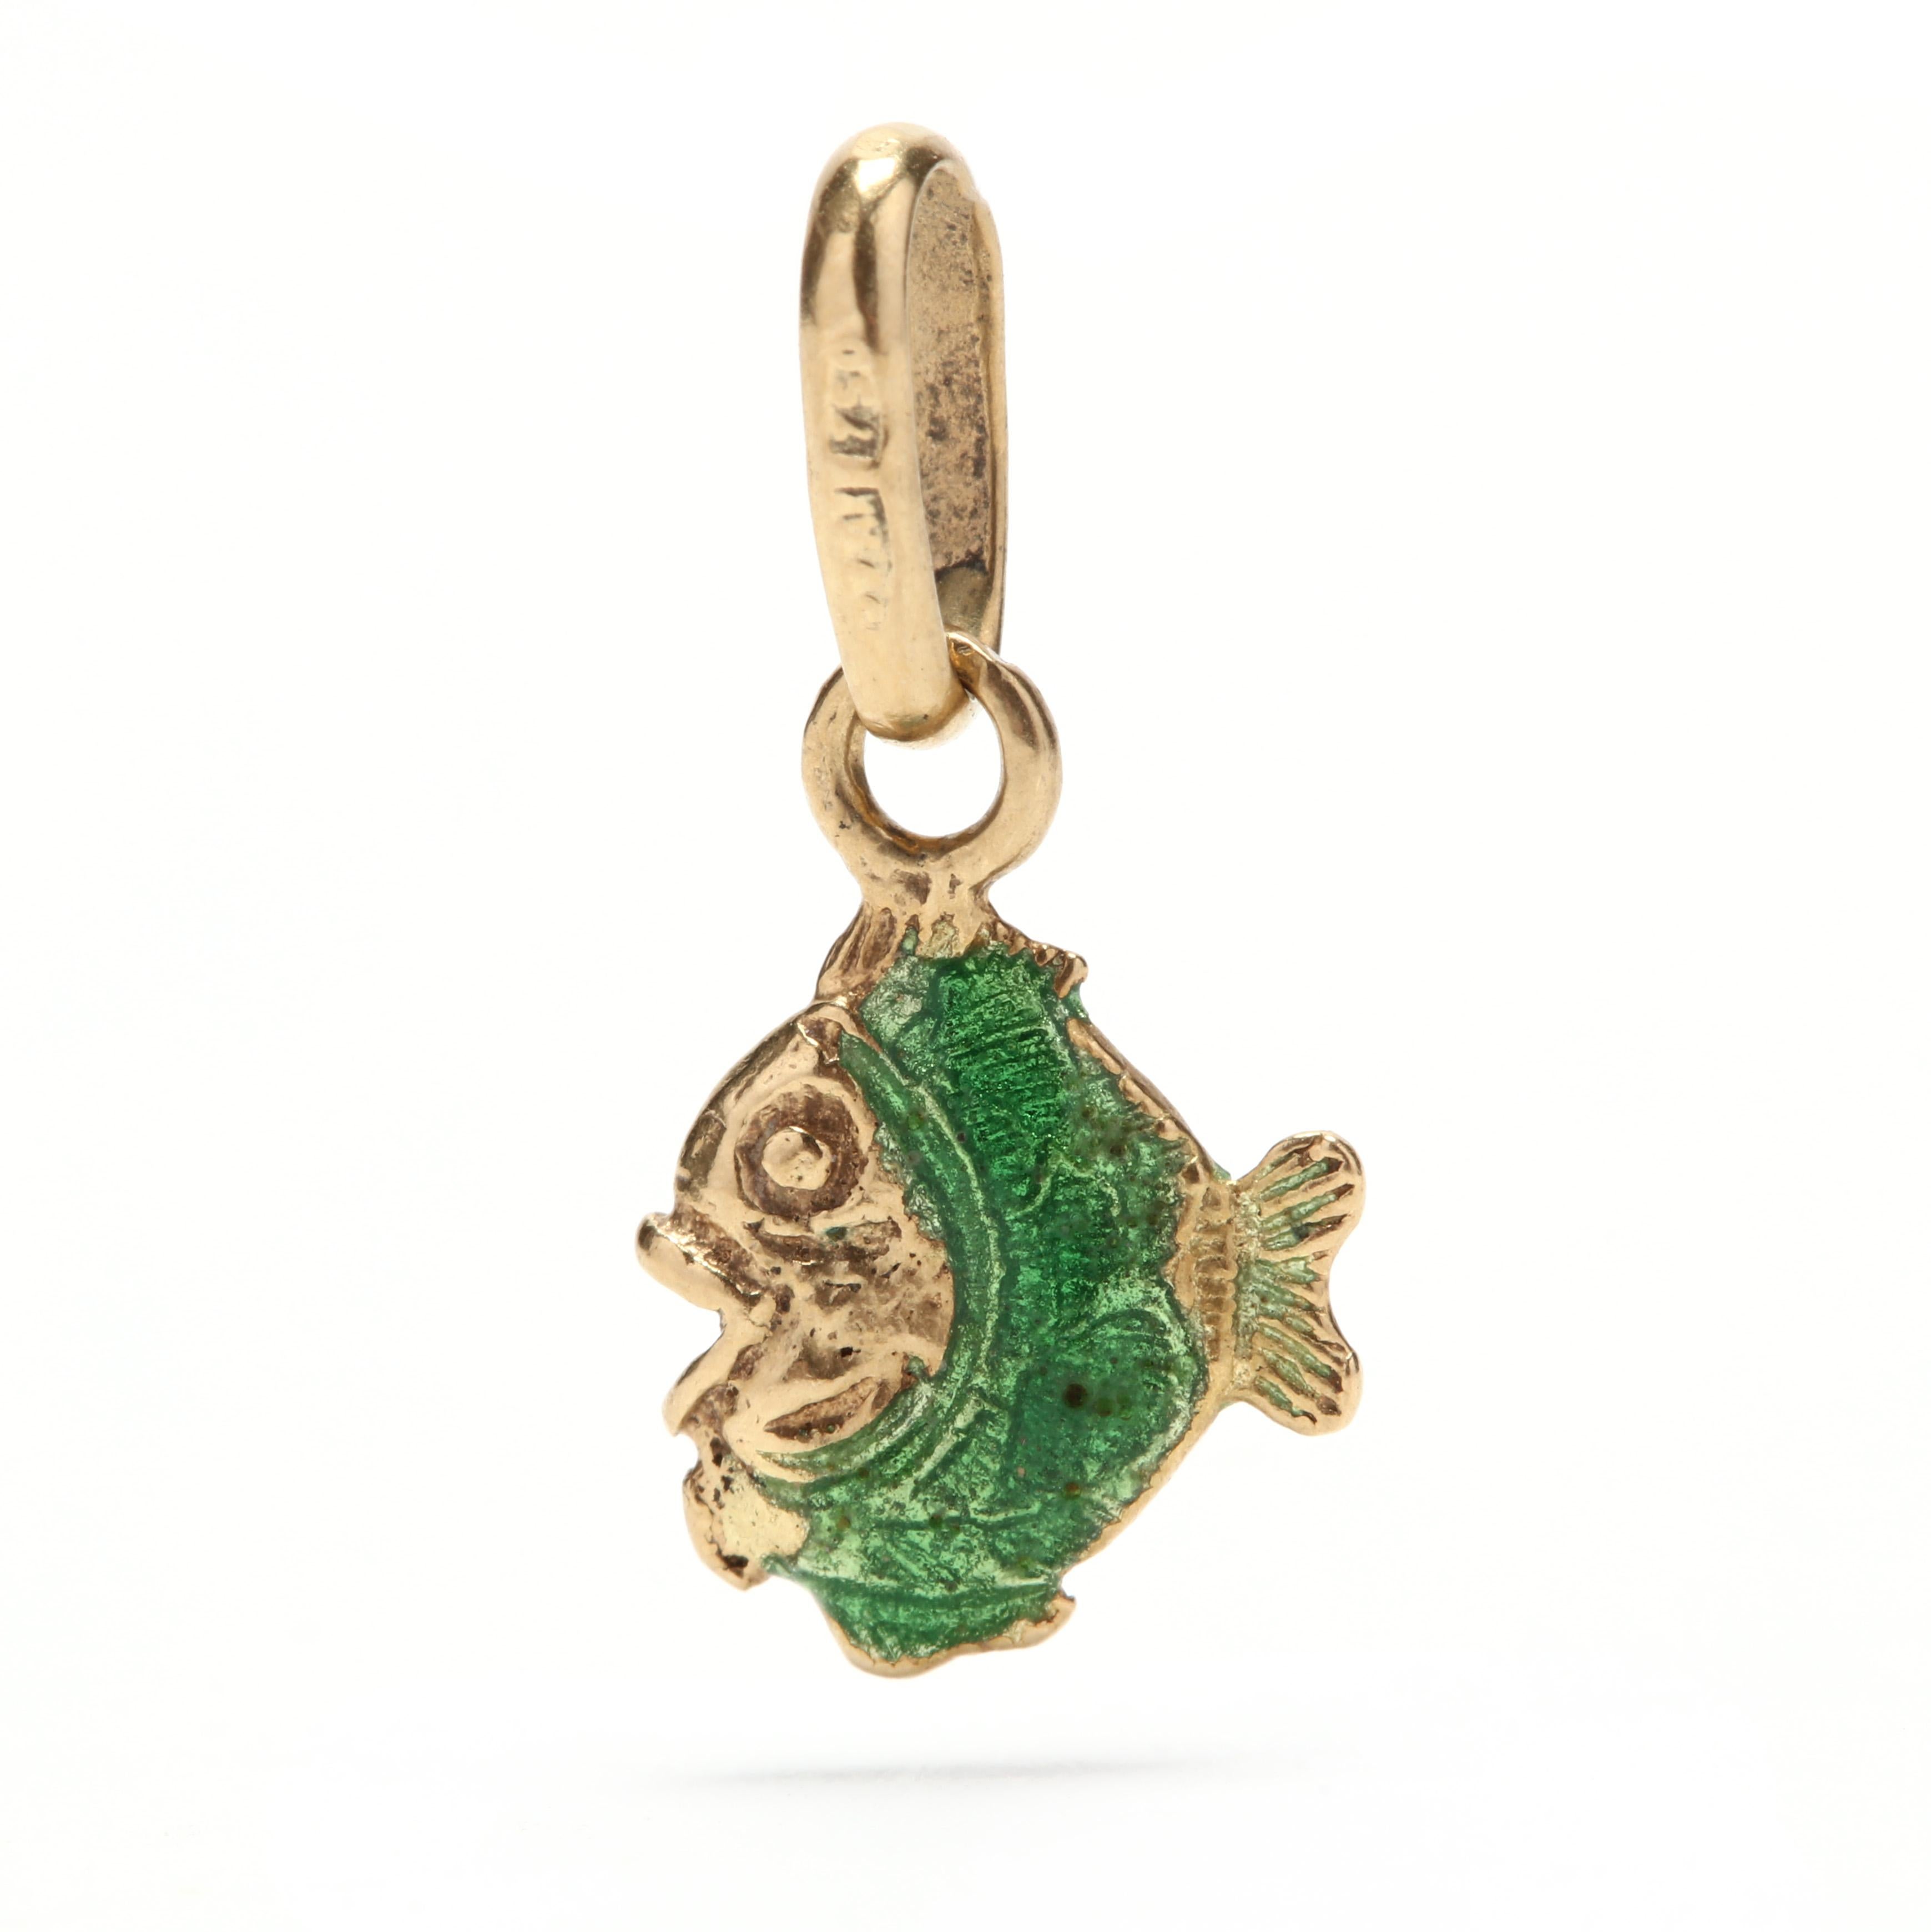 A 14 karat yellow gold and green enamel fish charm / pendant. This pendant features an open mouthed fish motif with engraved detailing covered in translucent green enamel.

Length: 11/16 in.

Width: 5/16 in.

.63 dwts.
* Please note that this is a